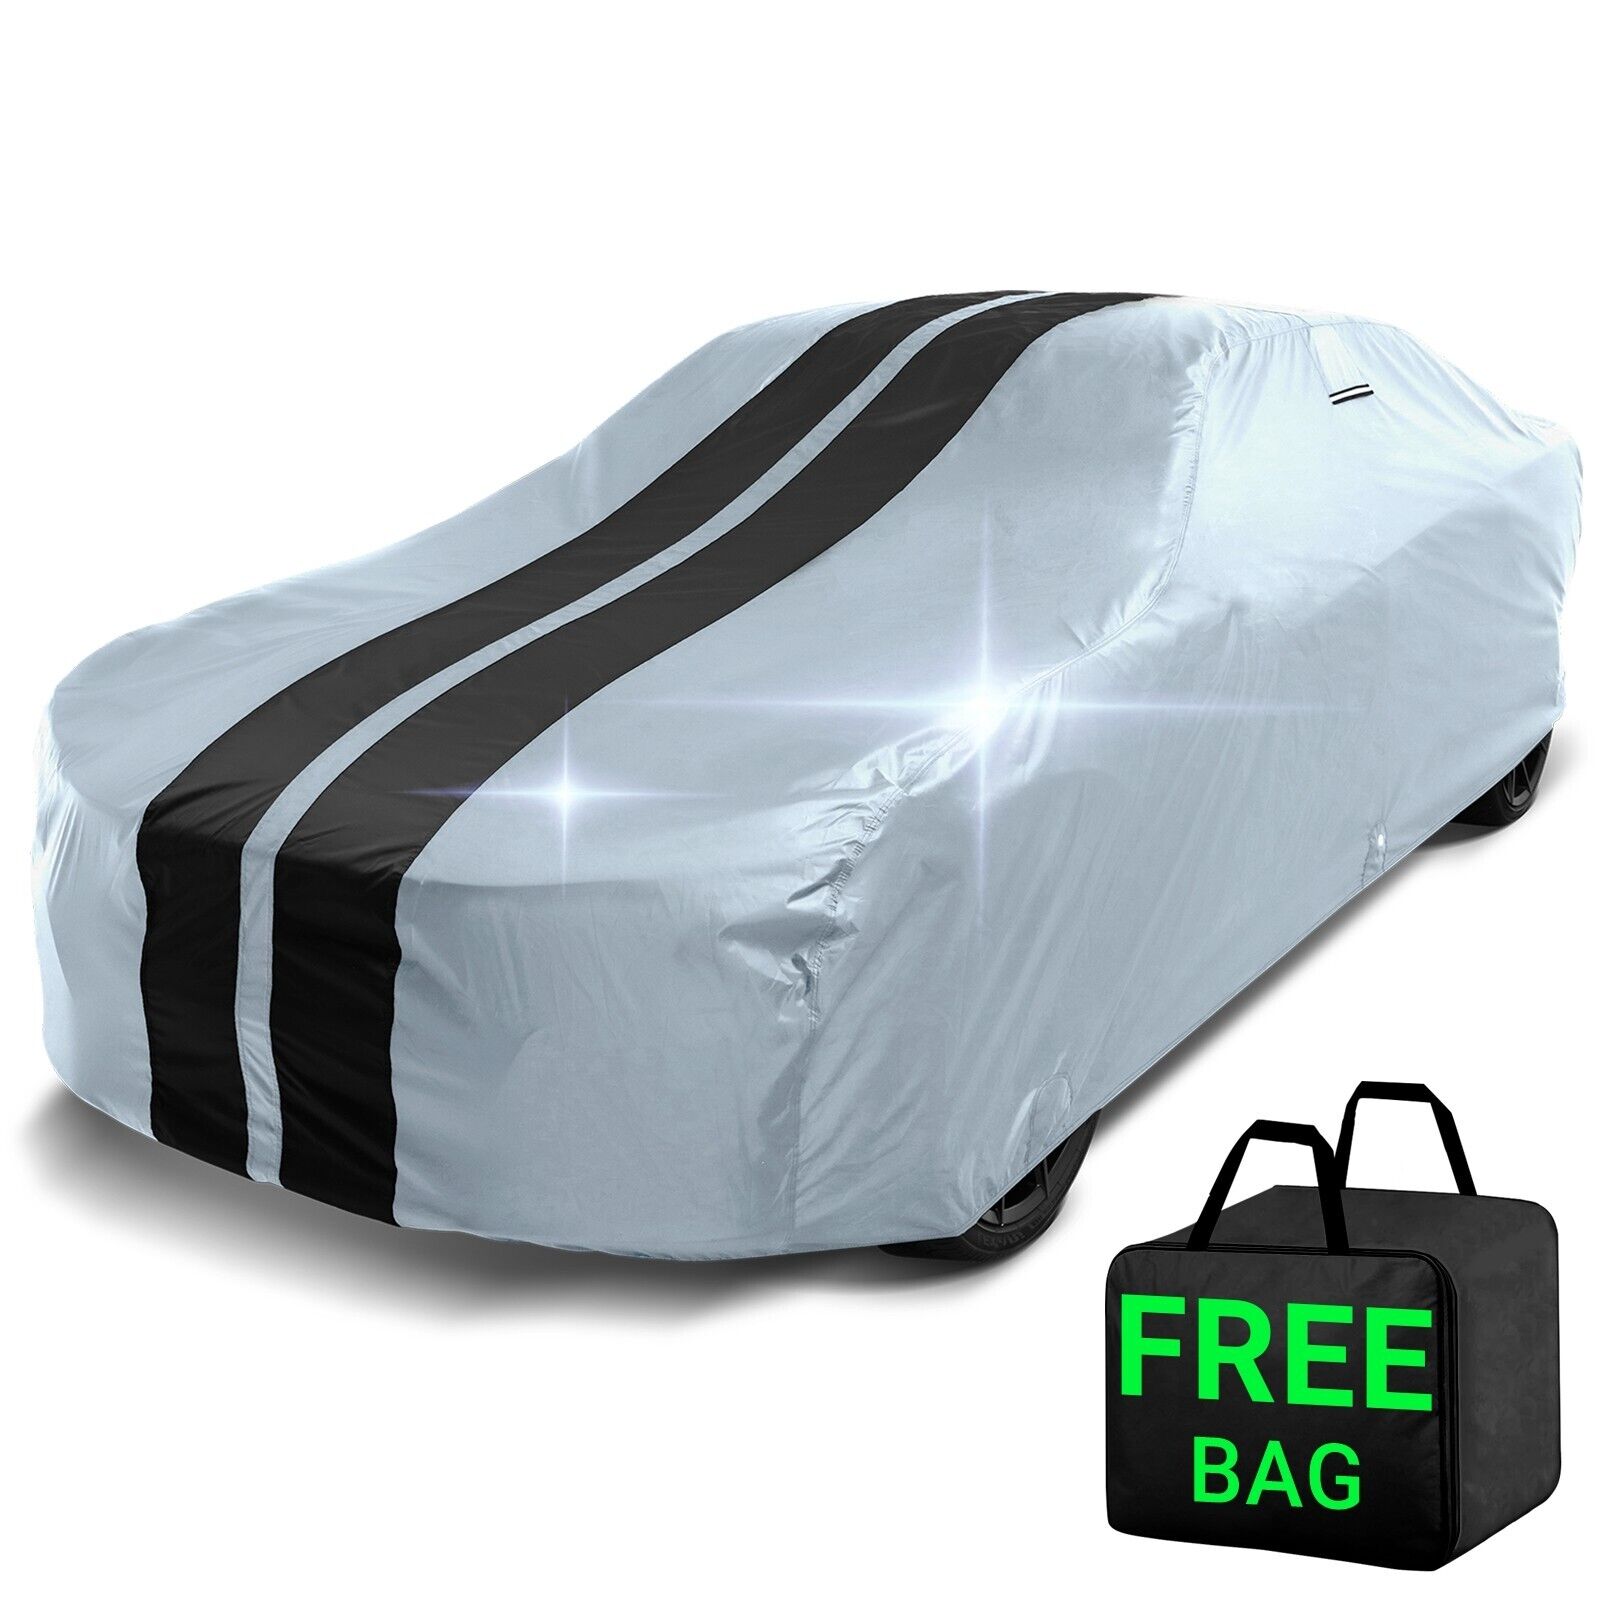 1958-1972 Chevy Biscayne Custom Car Cover - All-Weather Waterproof Protection